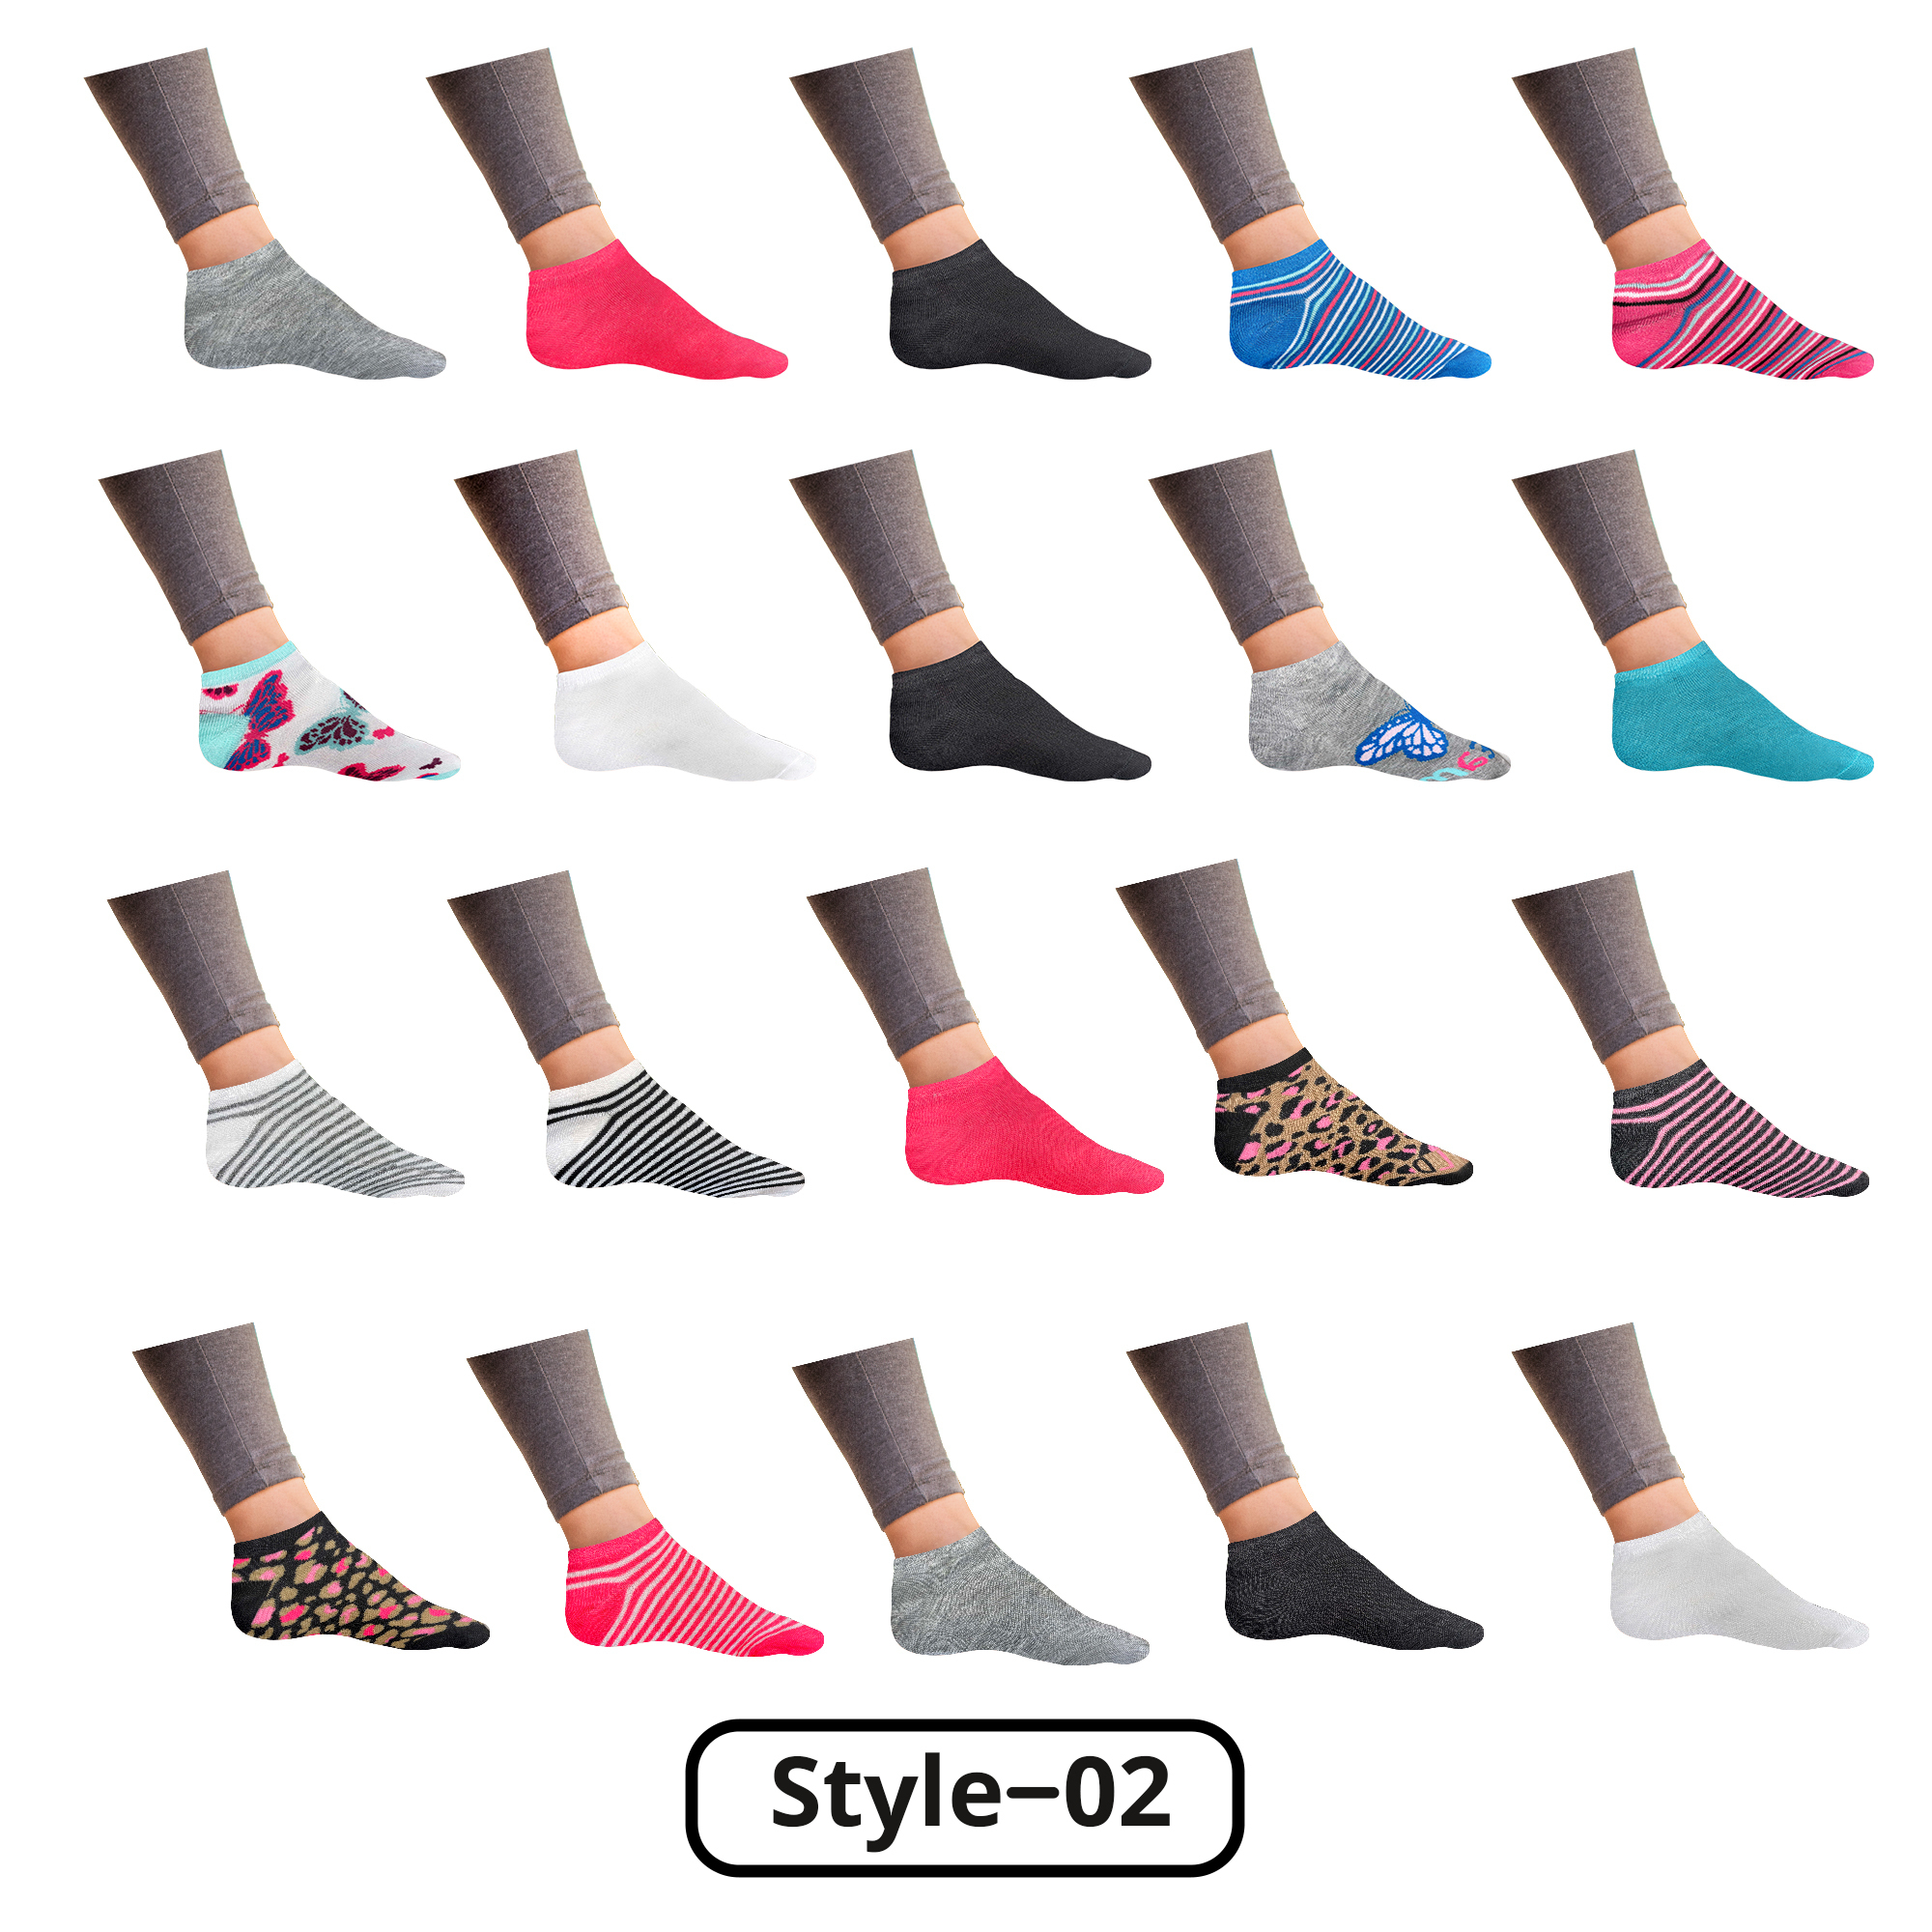 20-Pairs: Women’s Breathable Stylish Colorful Fun No Show Low Cut Ankle Socks - Style 3